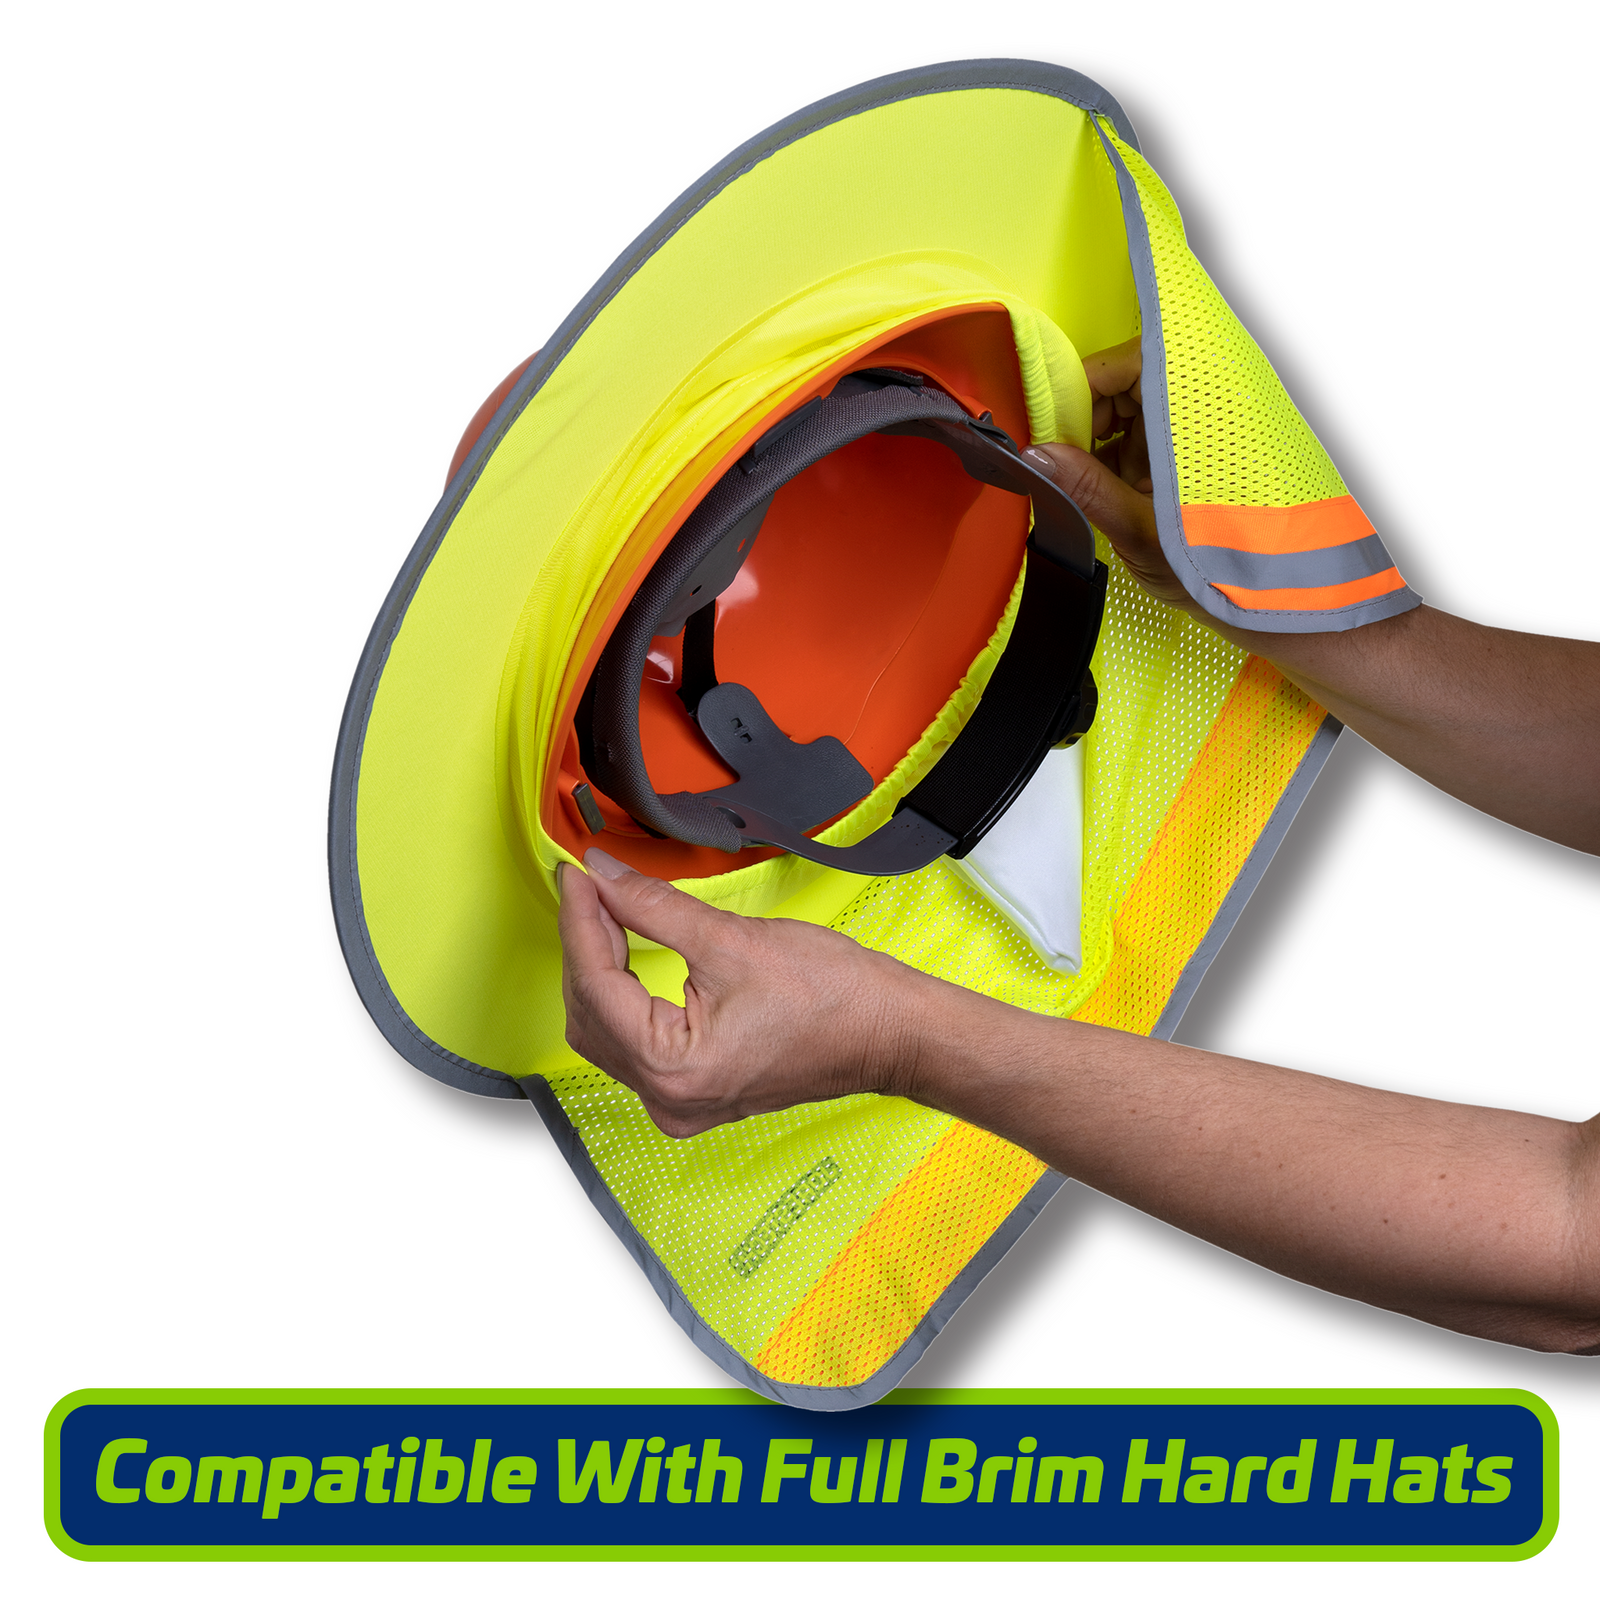 Hi vis two tone sun shield installed in a full brim orange hard hat with 4 point sustention harness. Accessory compatible with full brim hard hats and helmets